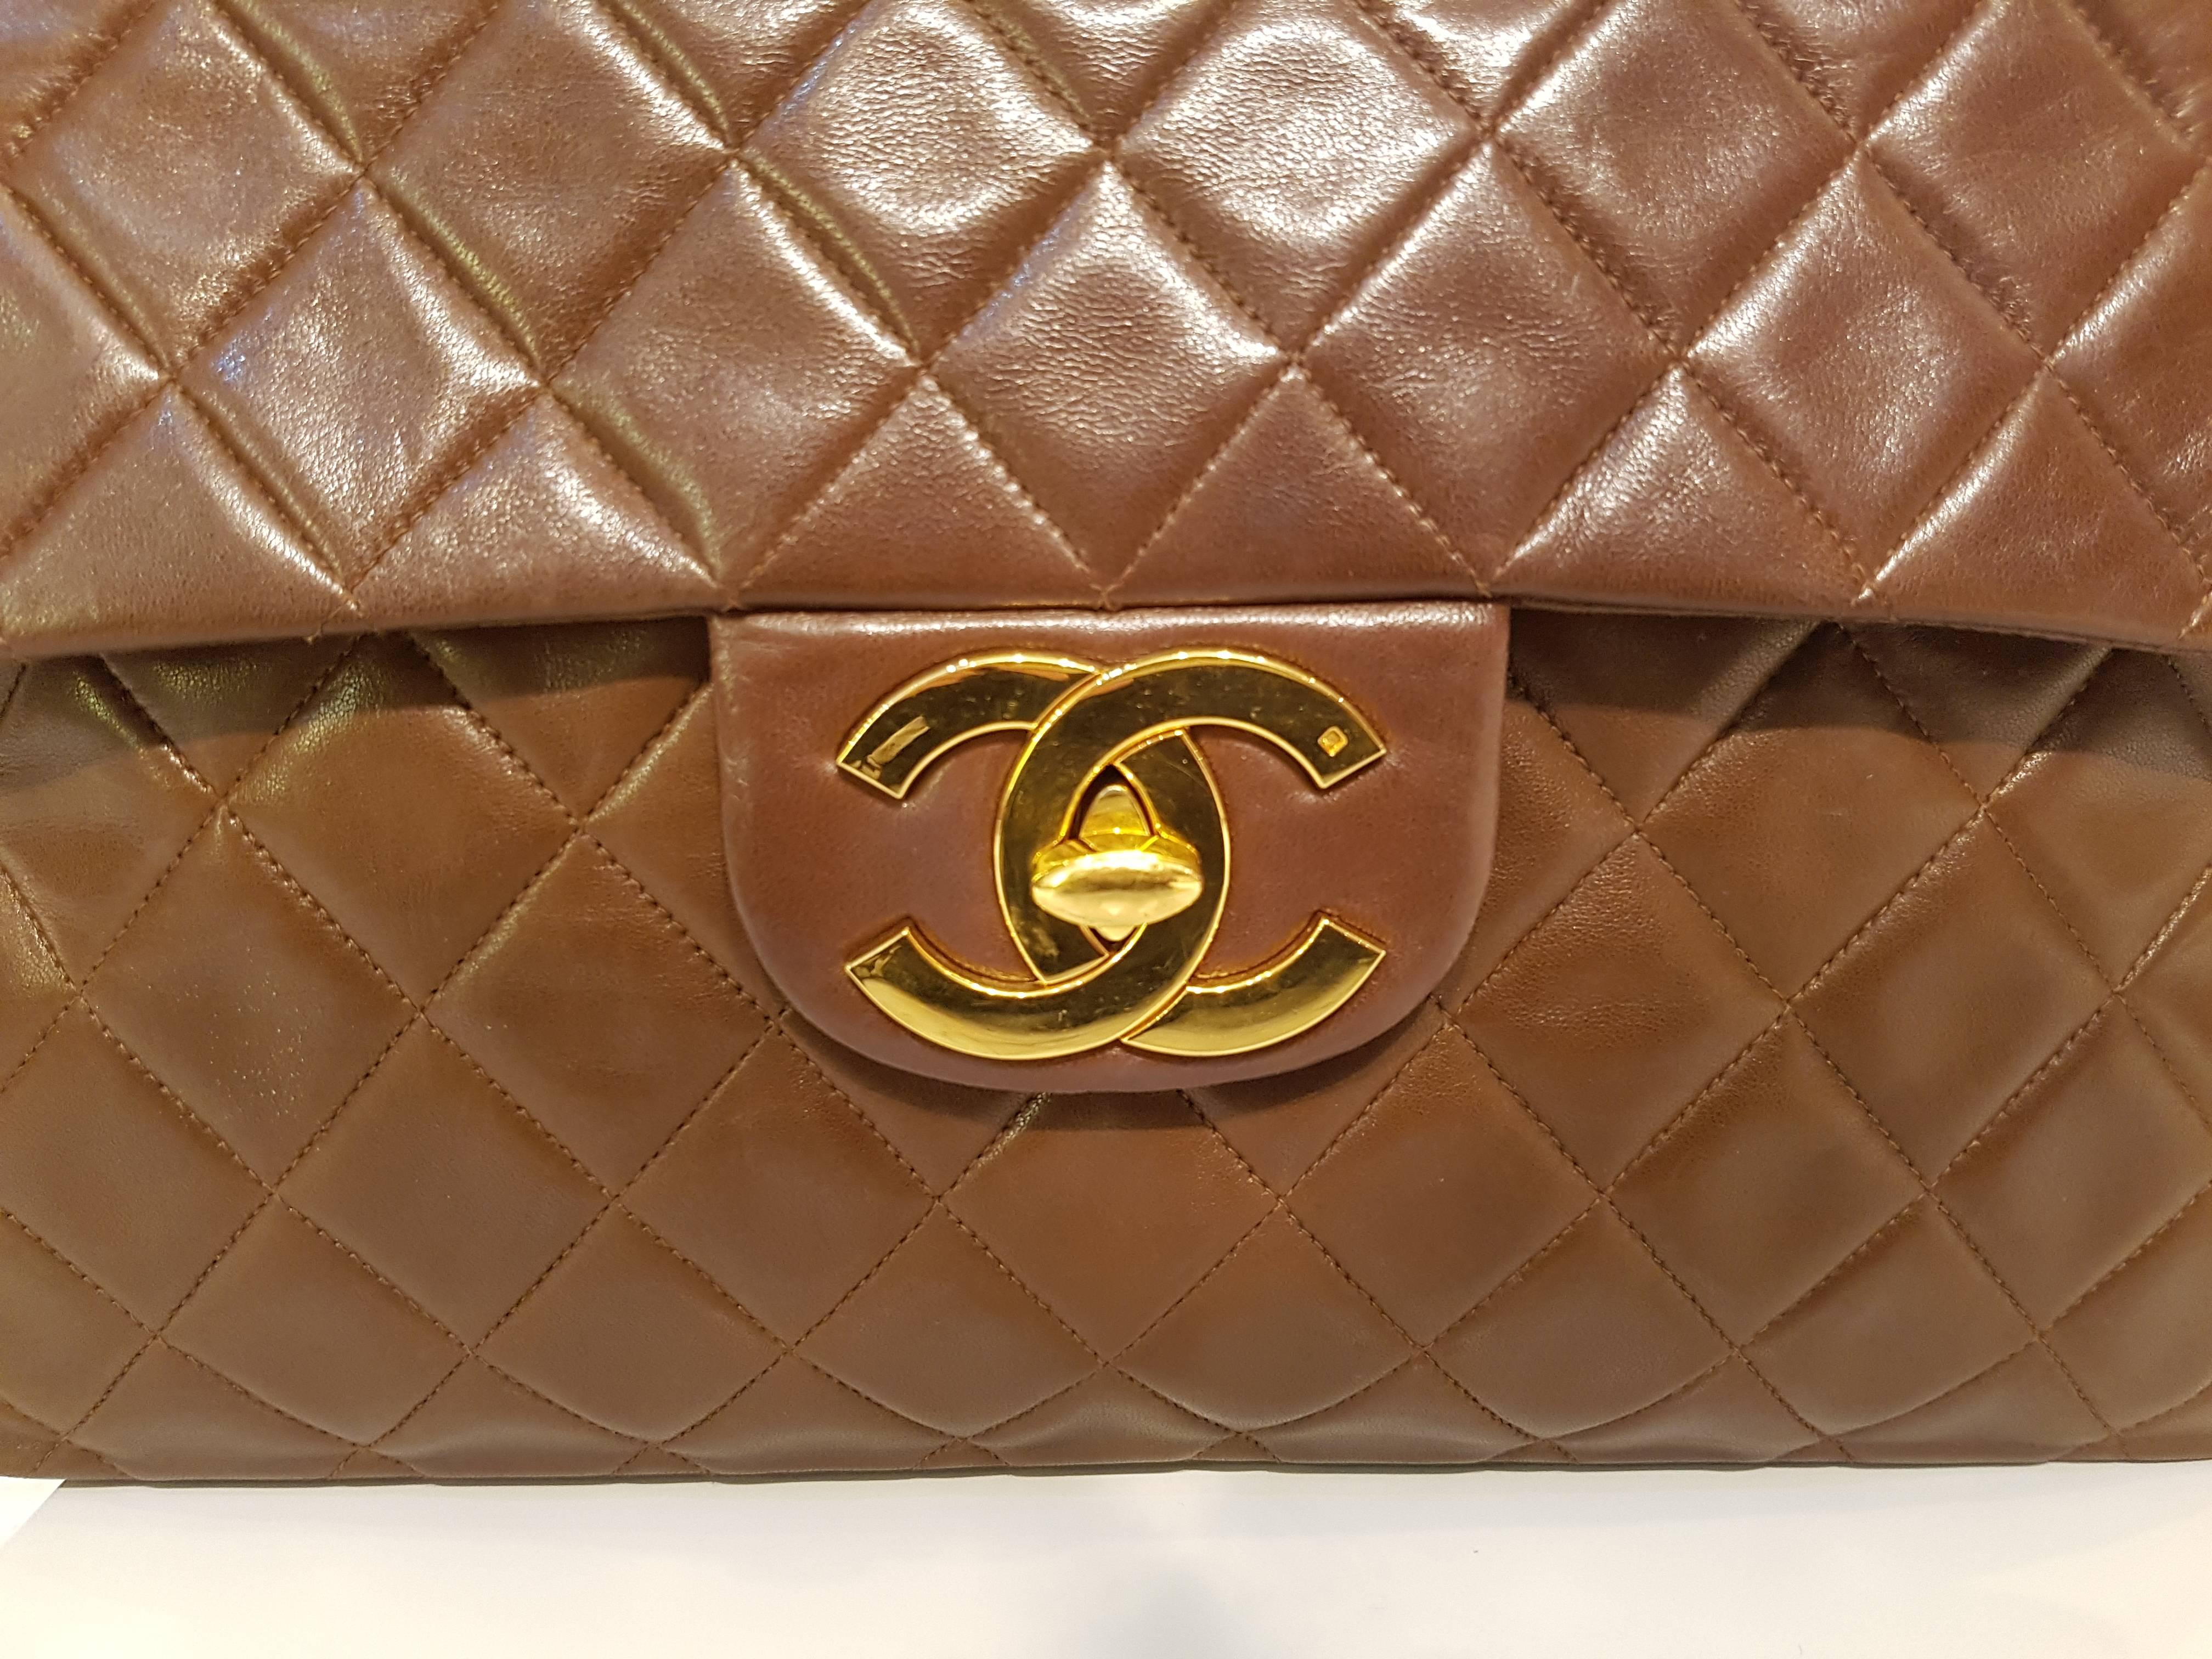 Brown lambskin maxi flap bag from Chanel Vintage featuring foldover top with twist-lock closure, a chain and leather strap, a back slip pocket, an internal zipped pocket, an internal slip pocket, an internal logo stamp, gold-tone hardware and a